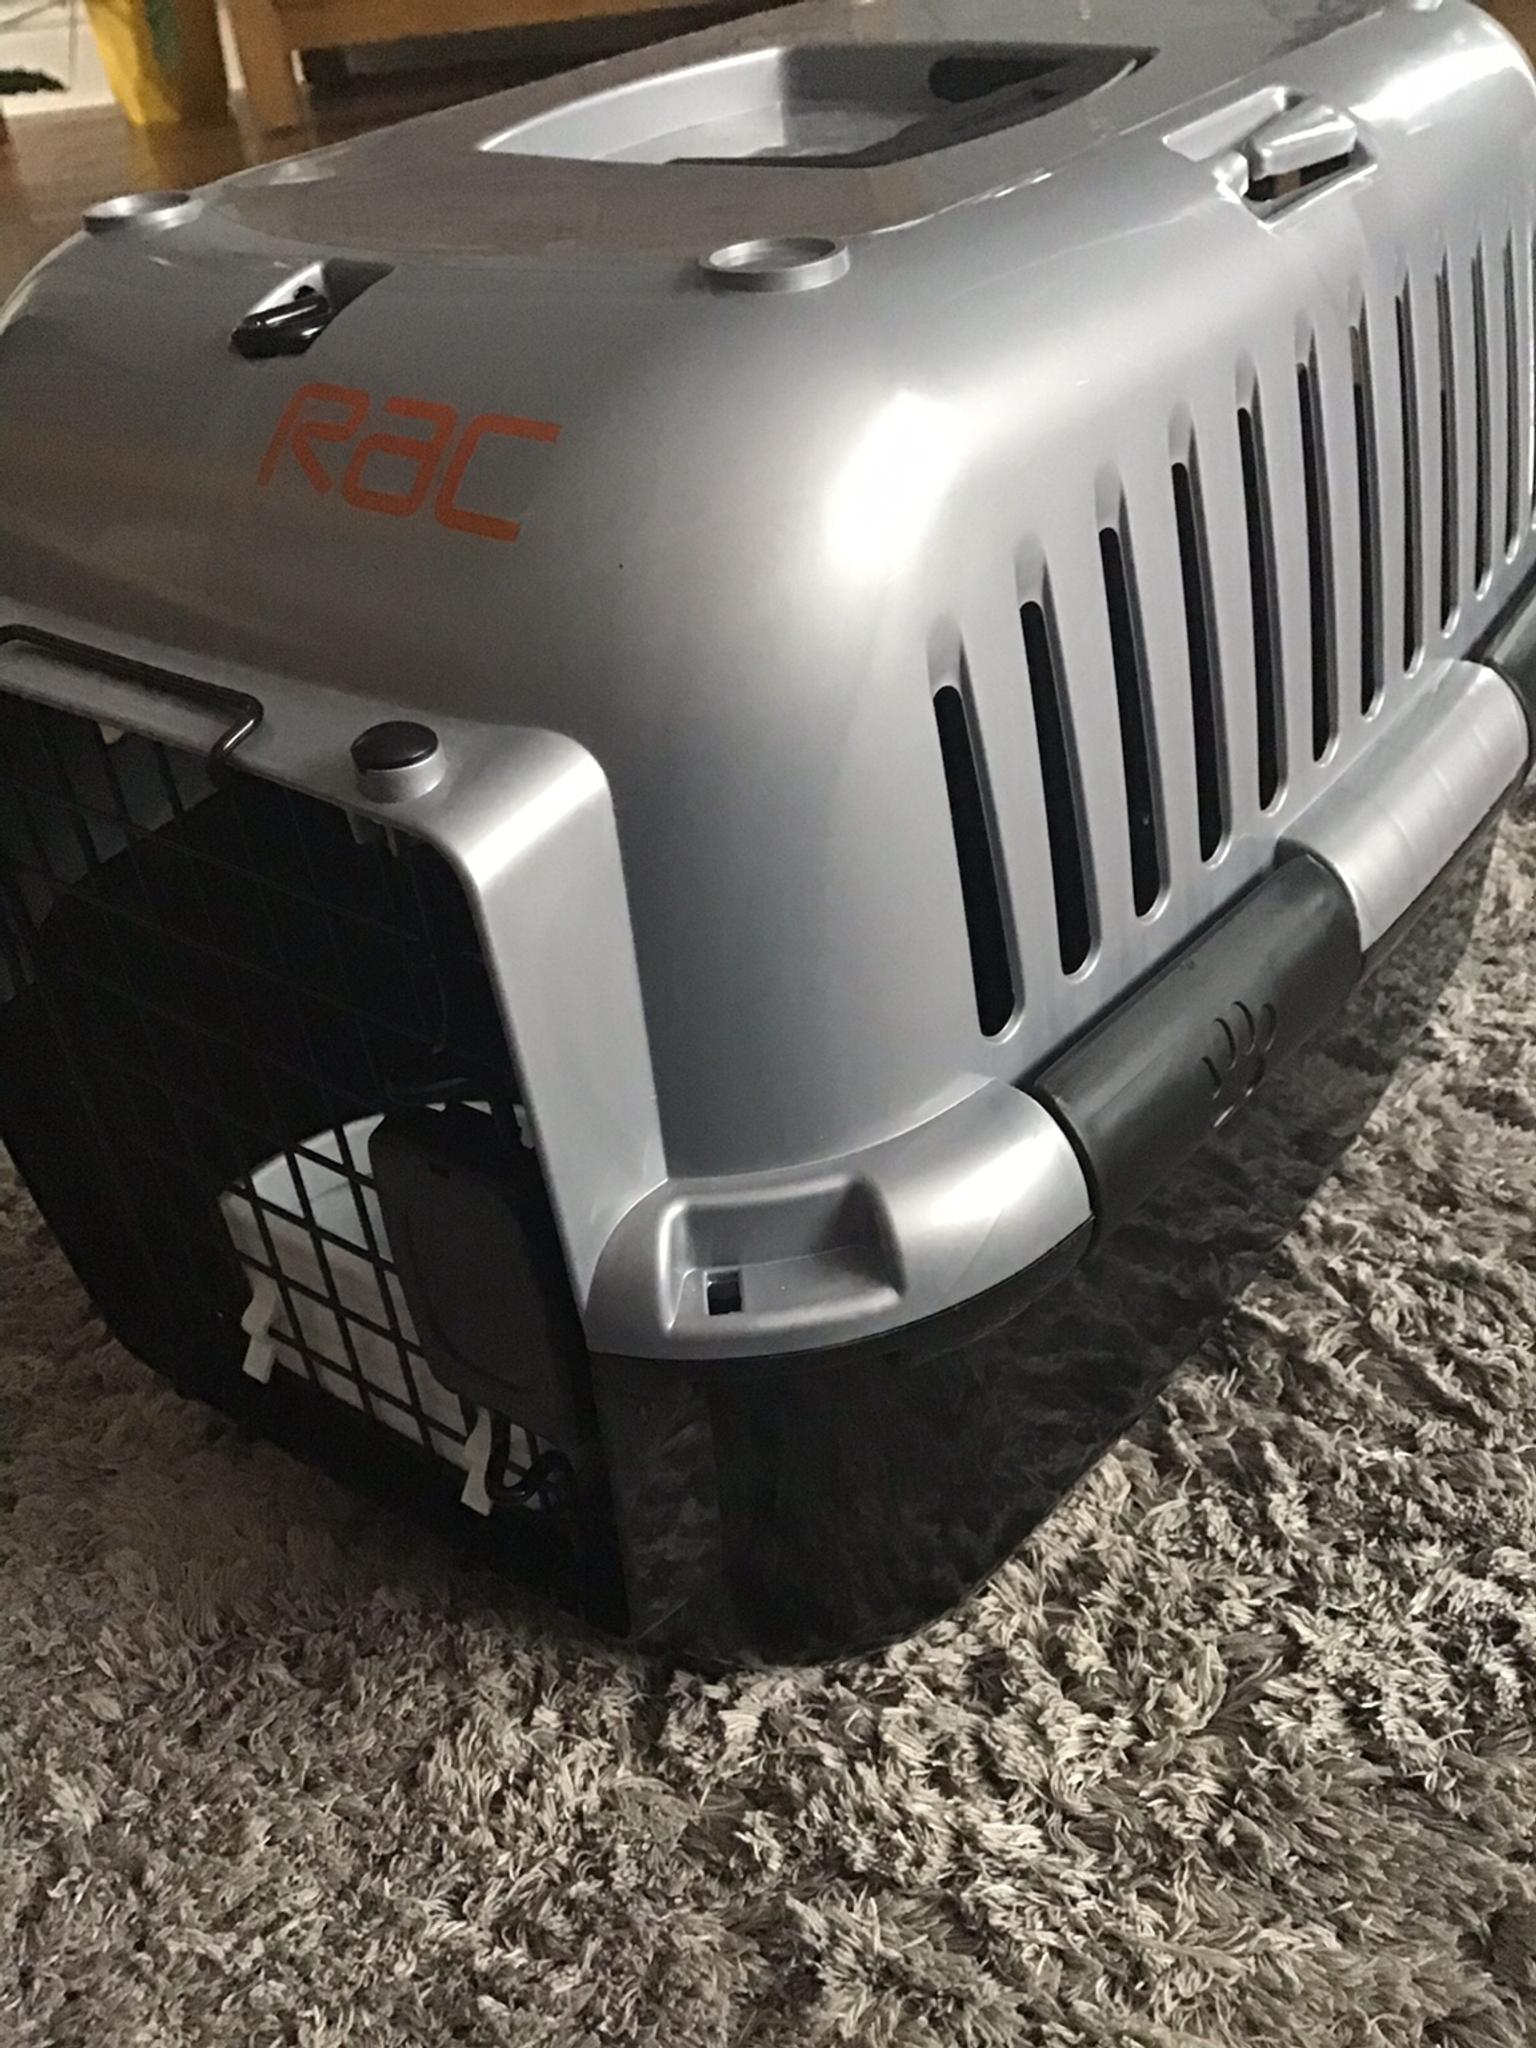 Dog carrier small-extra small in Wigan for £5.00 for sale | Shpock